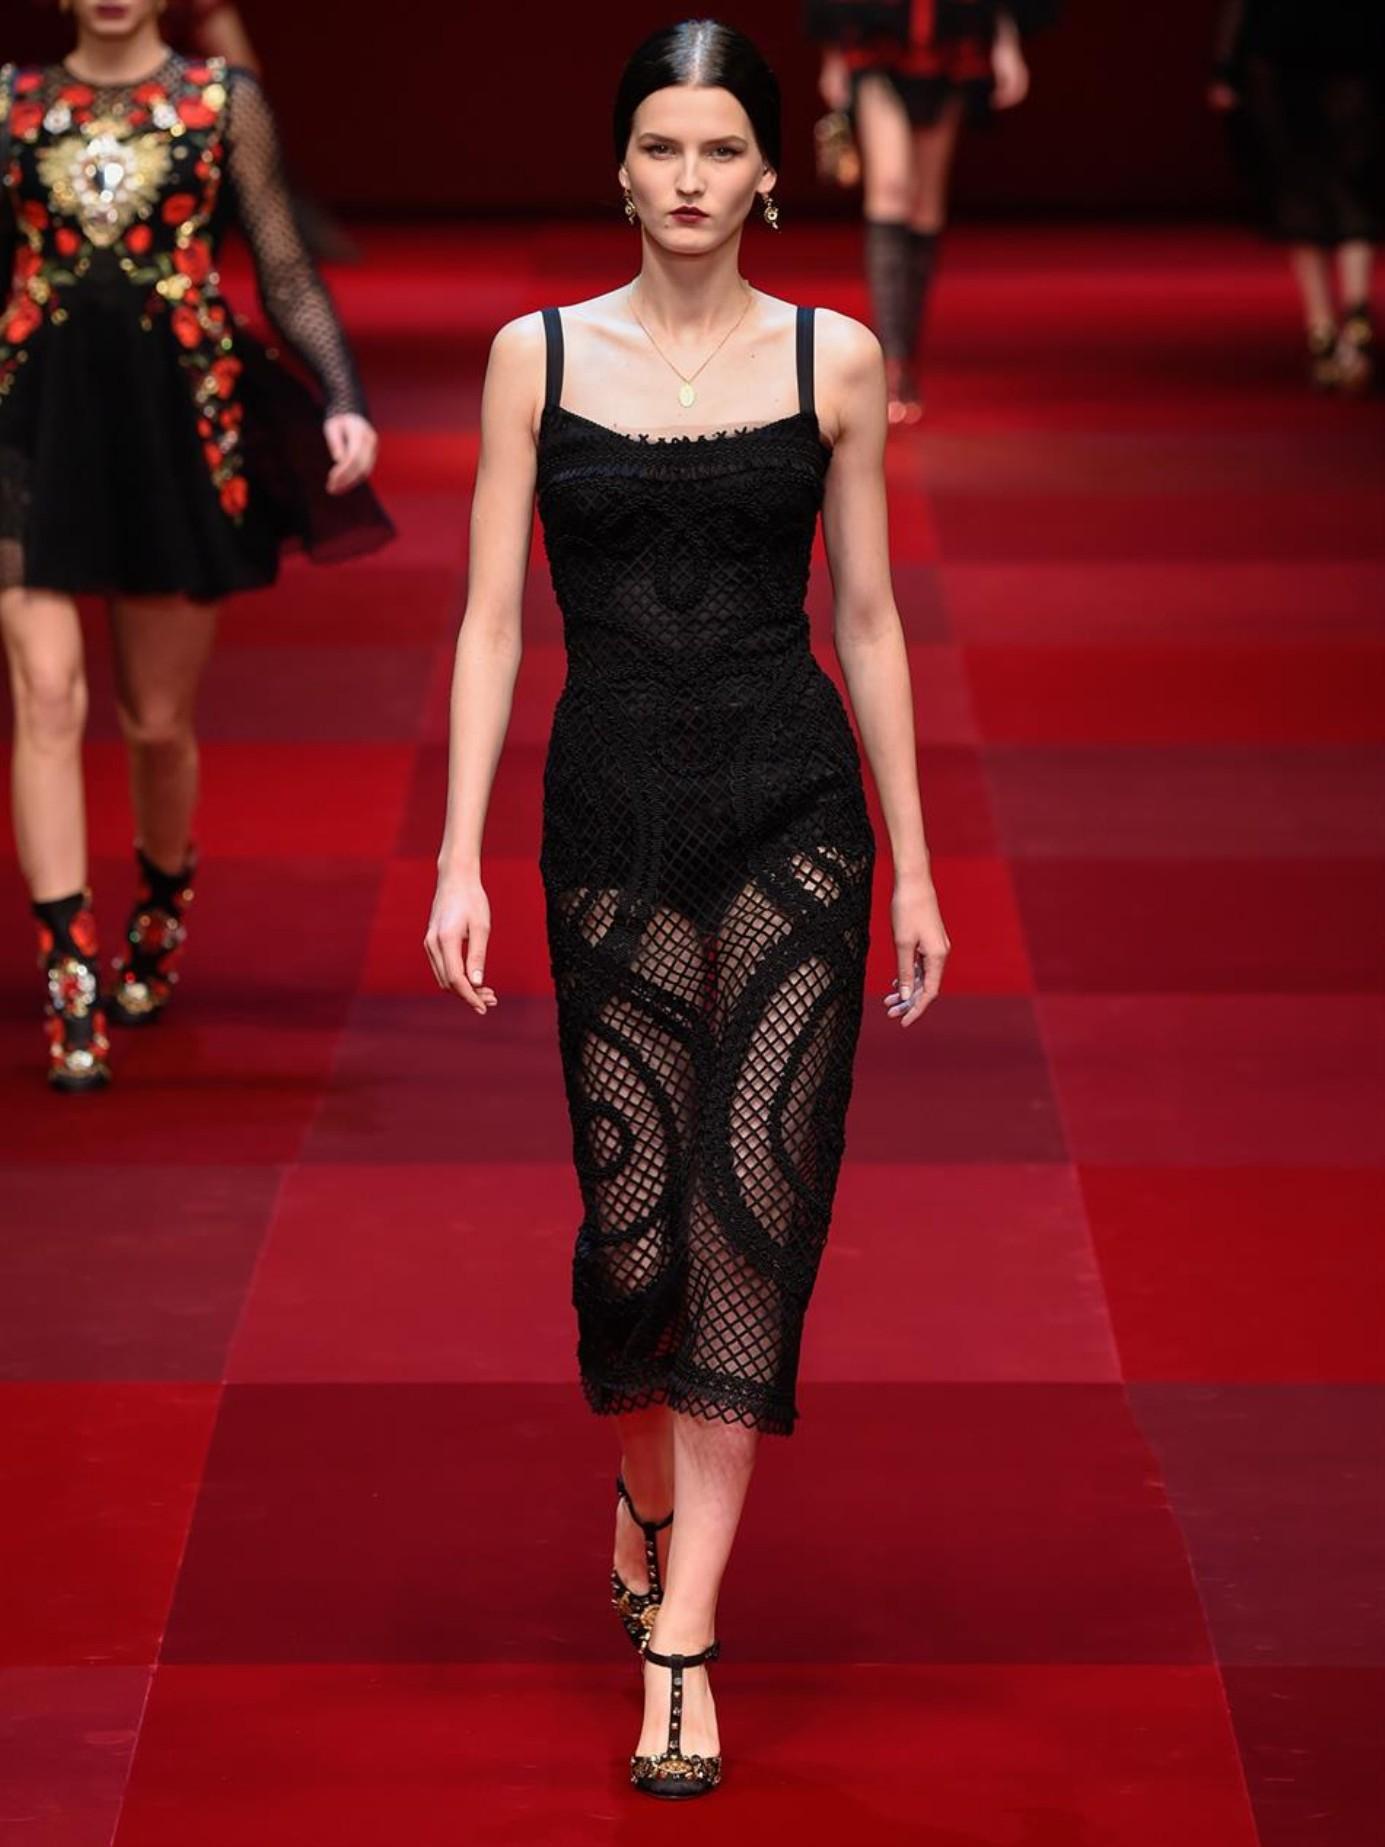 Dolce & Gabbana '15 Runway Black Embroidered Mesh Strapless Dress Sz IT48

Made In: Italy
Color: Black
Composition: 55% cotton, 23% rayon, 17% nylon, 5% polyester
Lining: Black slip - 86% silk, 8% cotton, 4% elastane, 2% nylon
Closure/Opening: Back